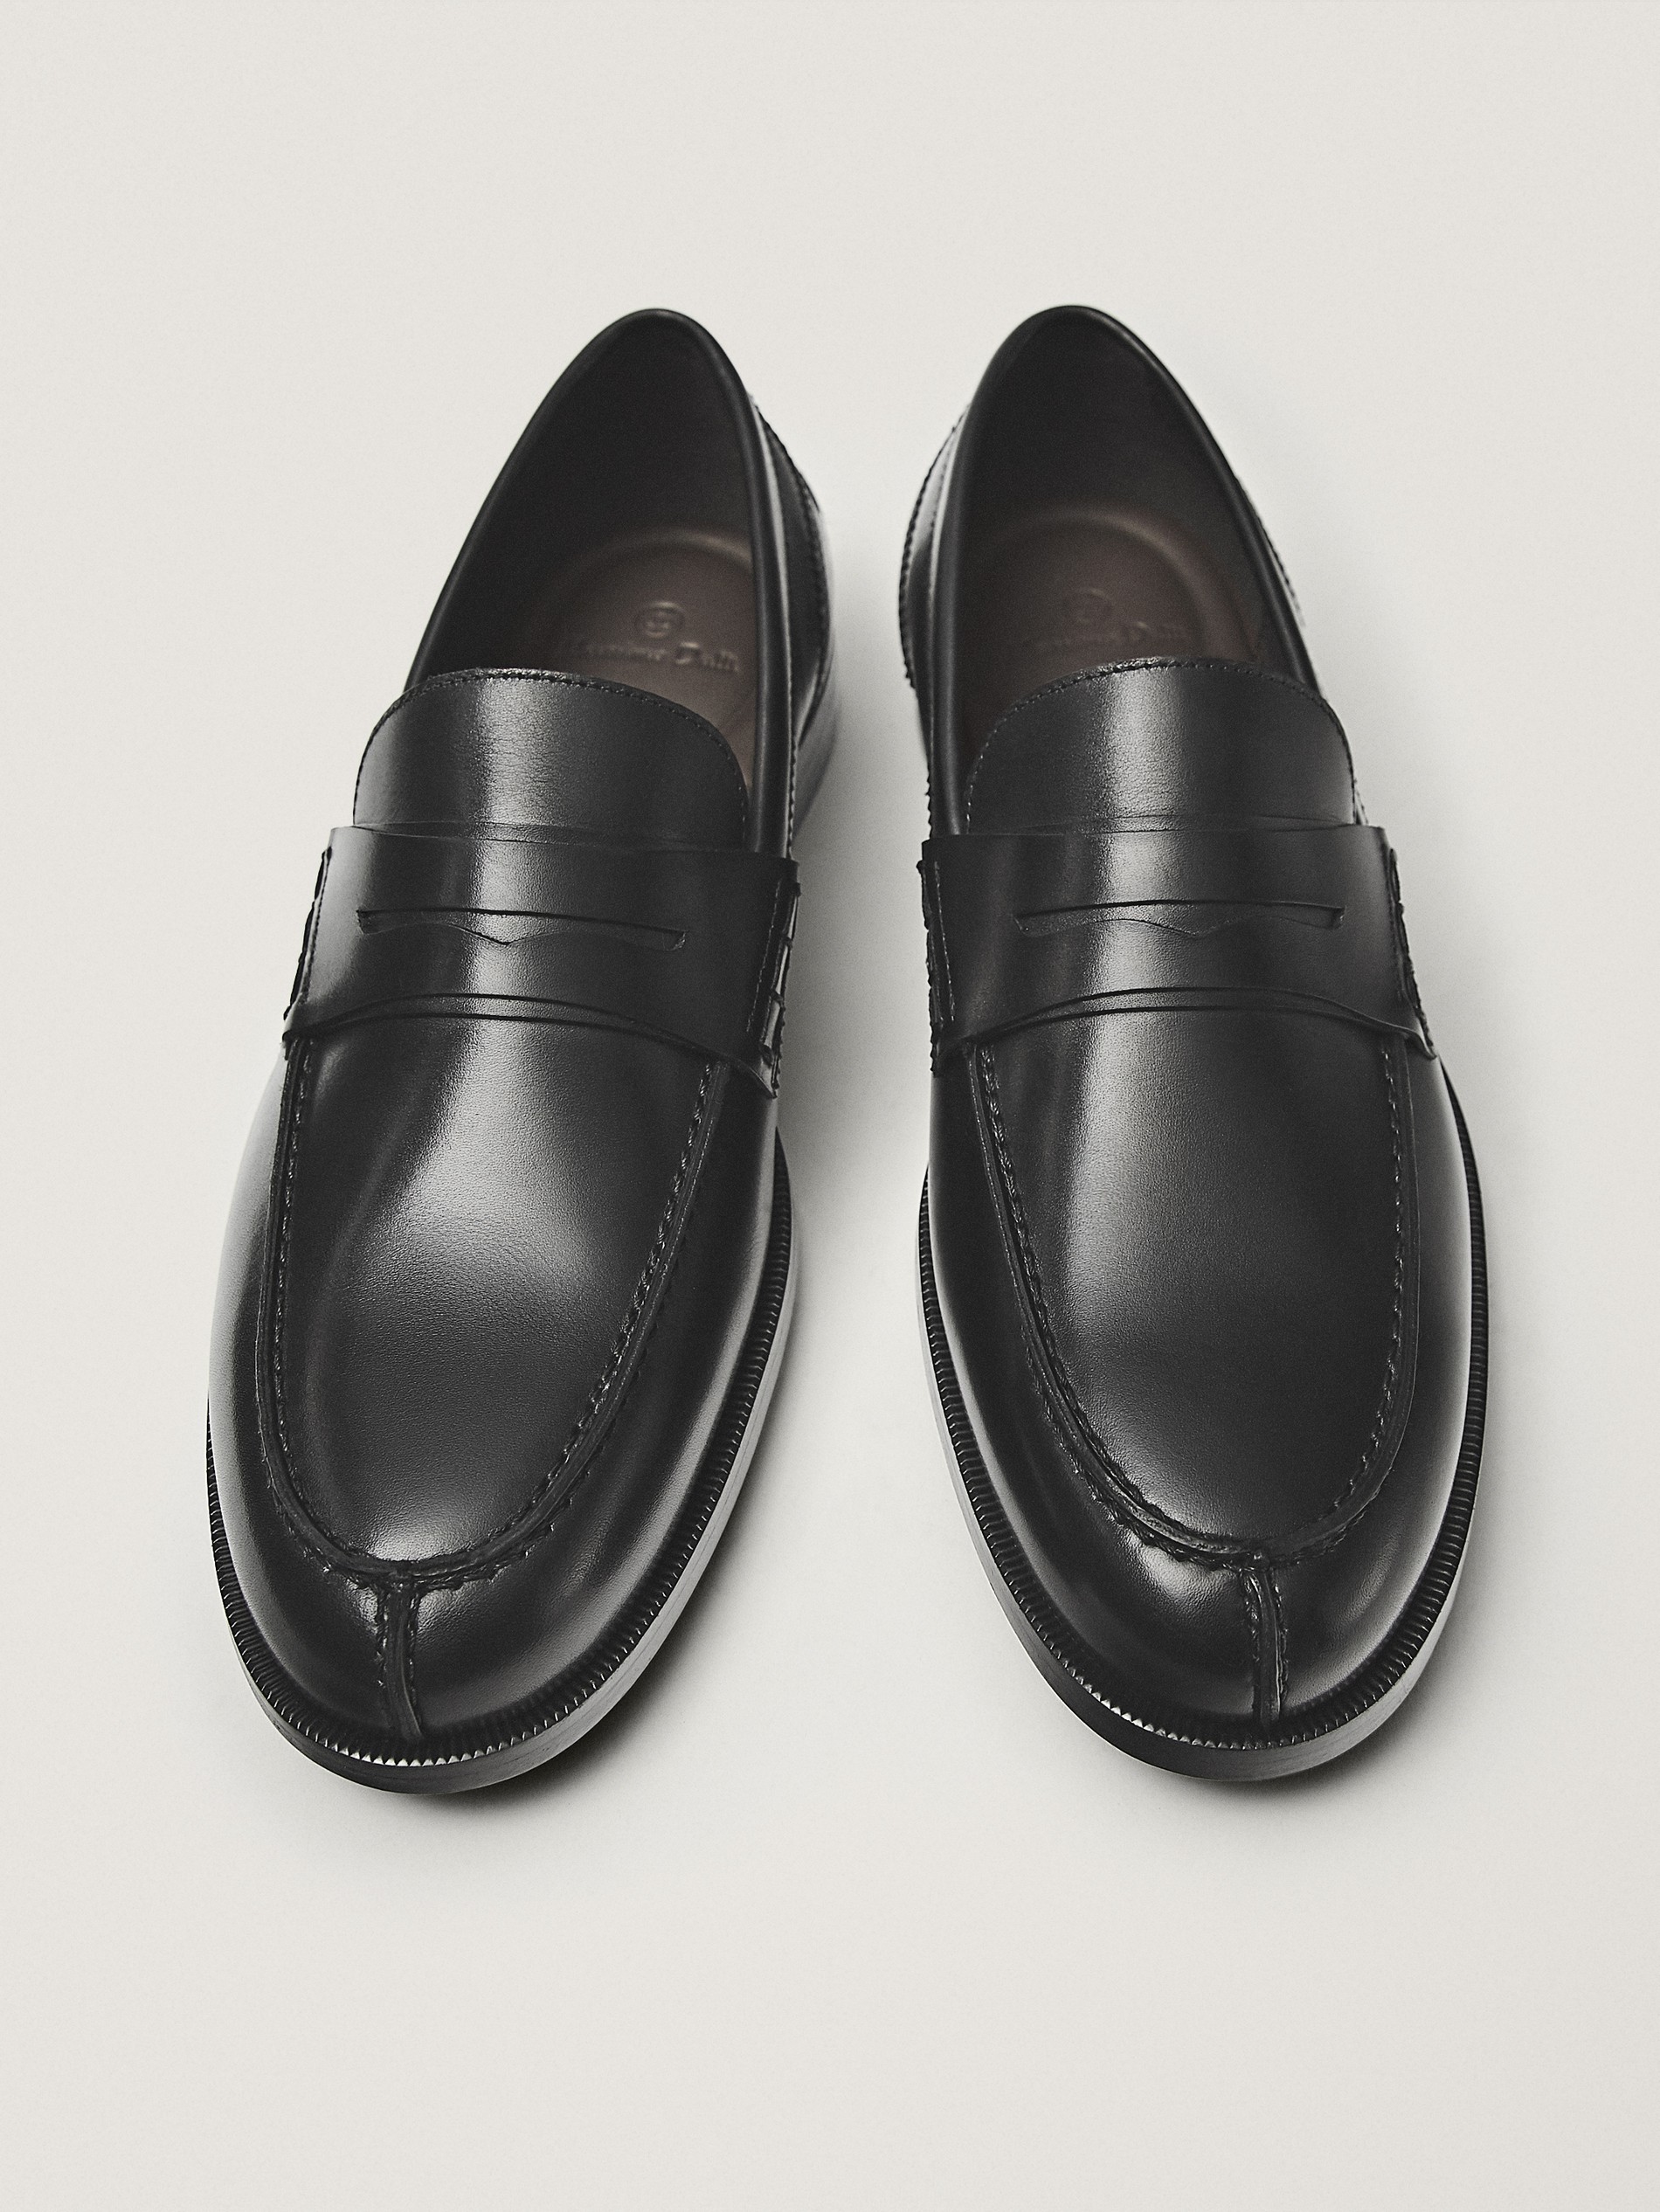 patent leather penny loafer